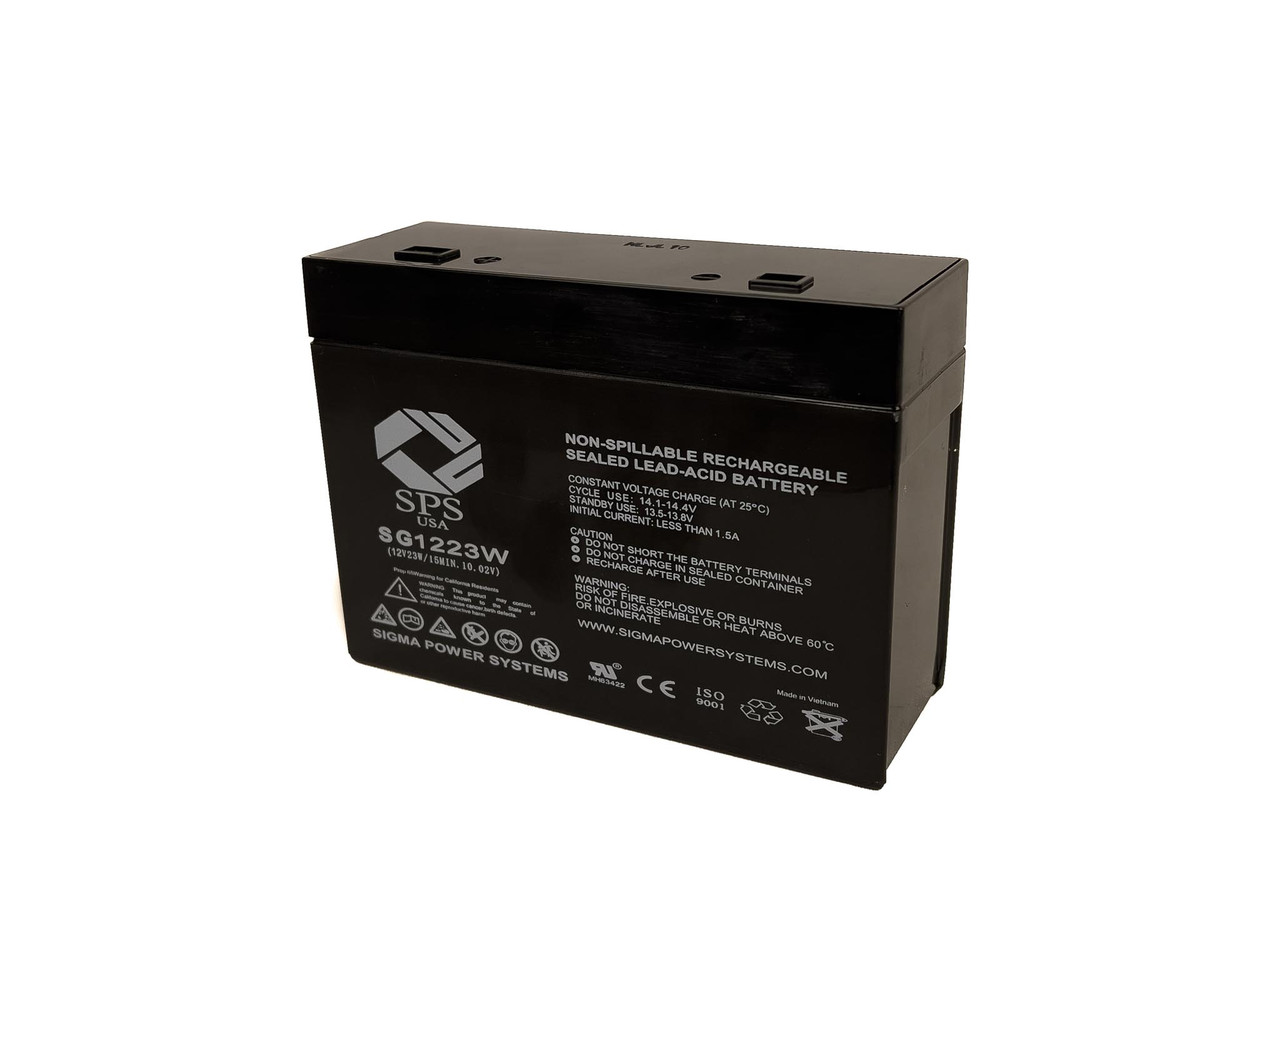 Raion Power 12V 5.2Ah 23W Non-Spillable Replacement Battery for RYTON RT1260A